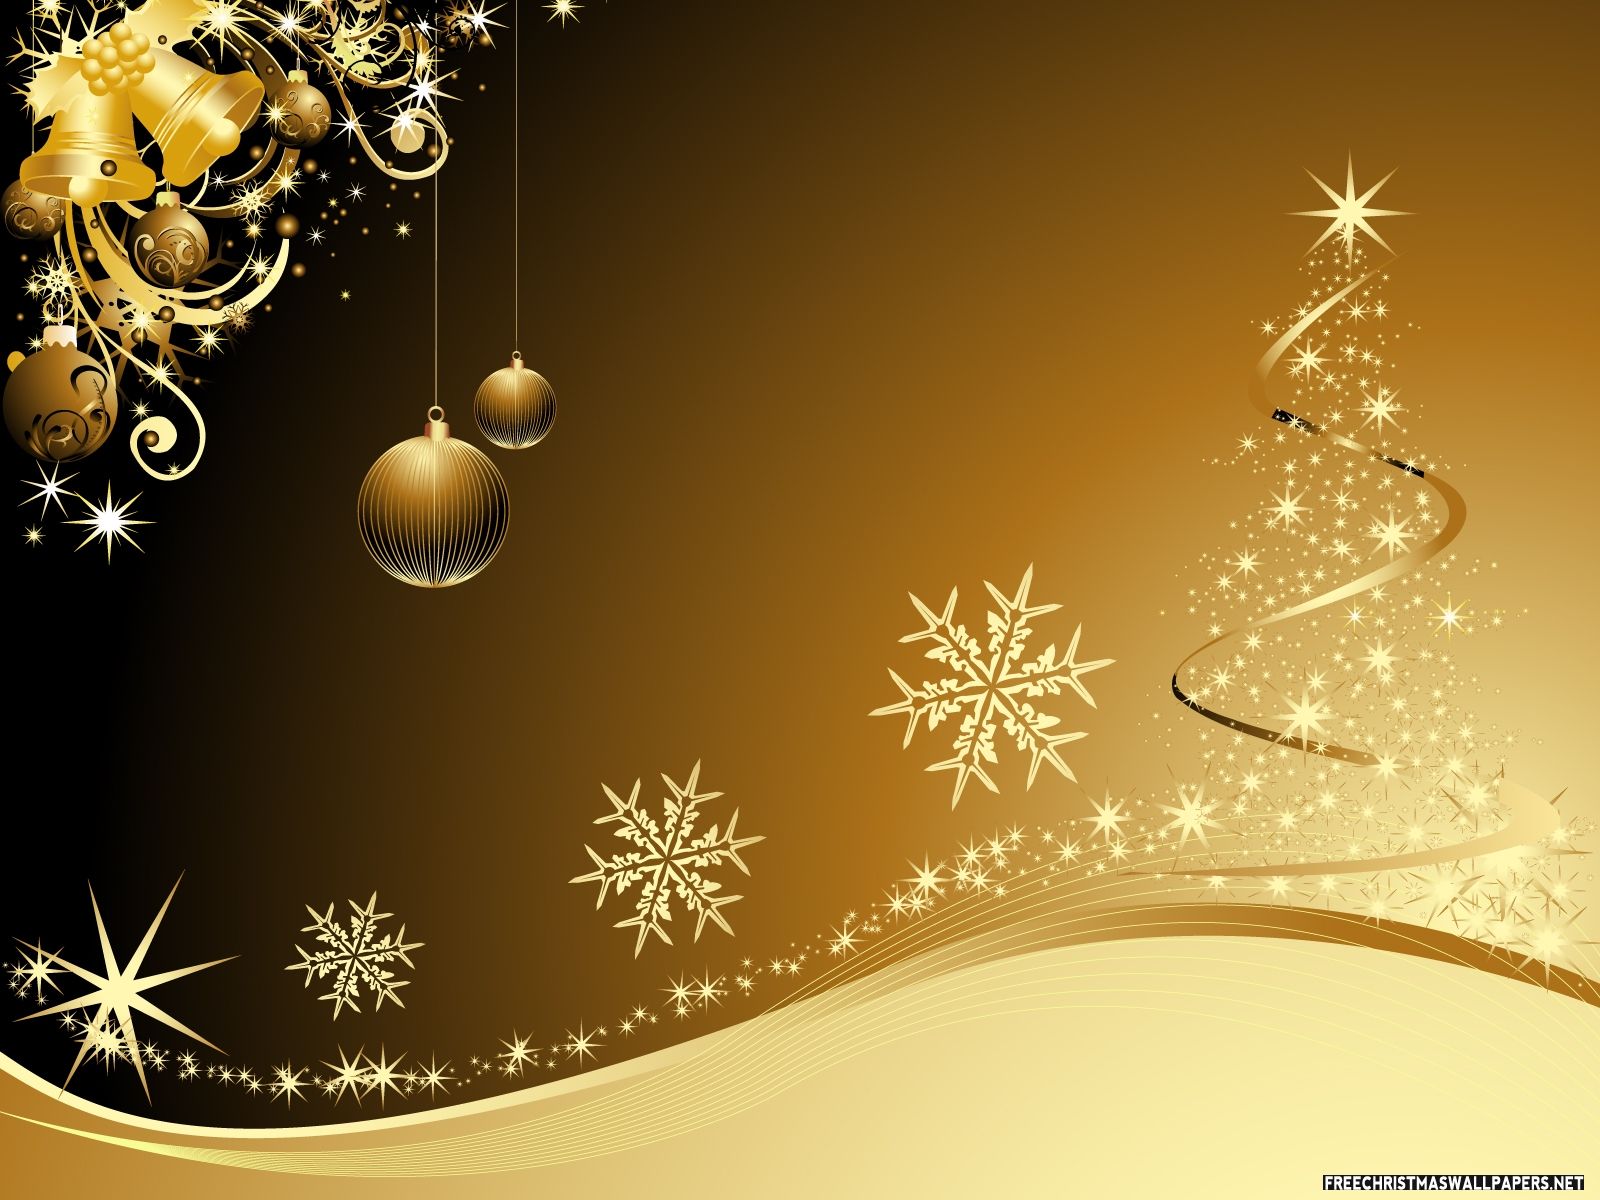 Free Christmas Wallpaper Pack 62: 46 Free Christmas Wallpaper Collection